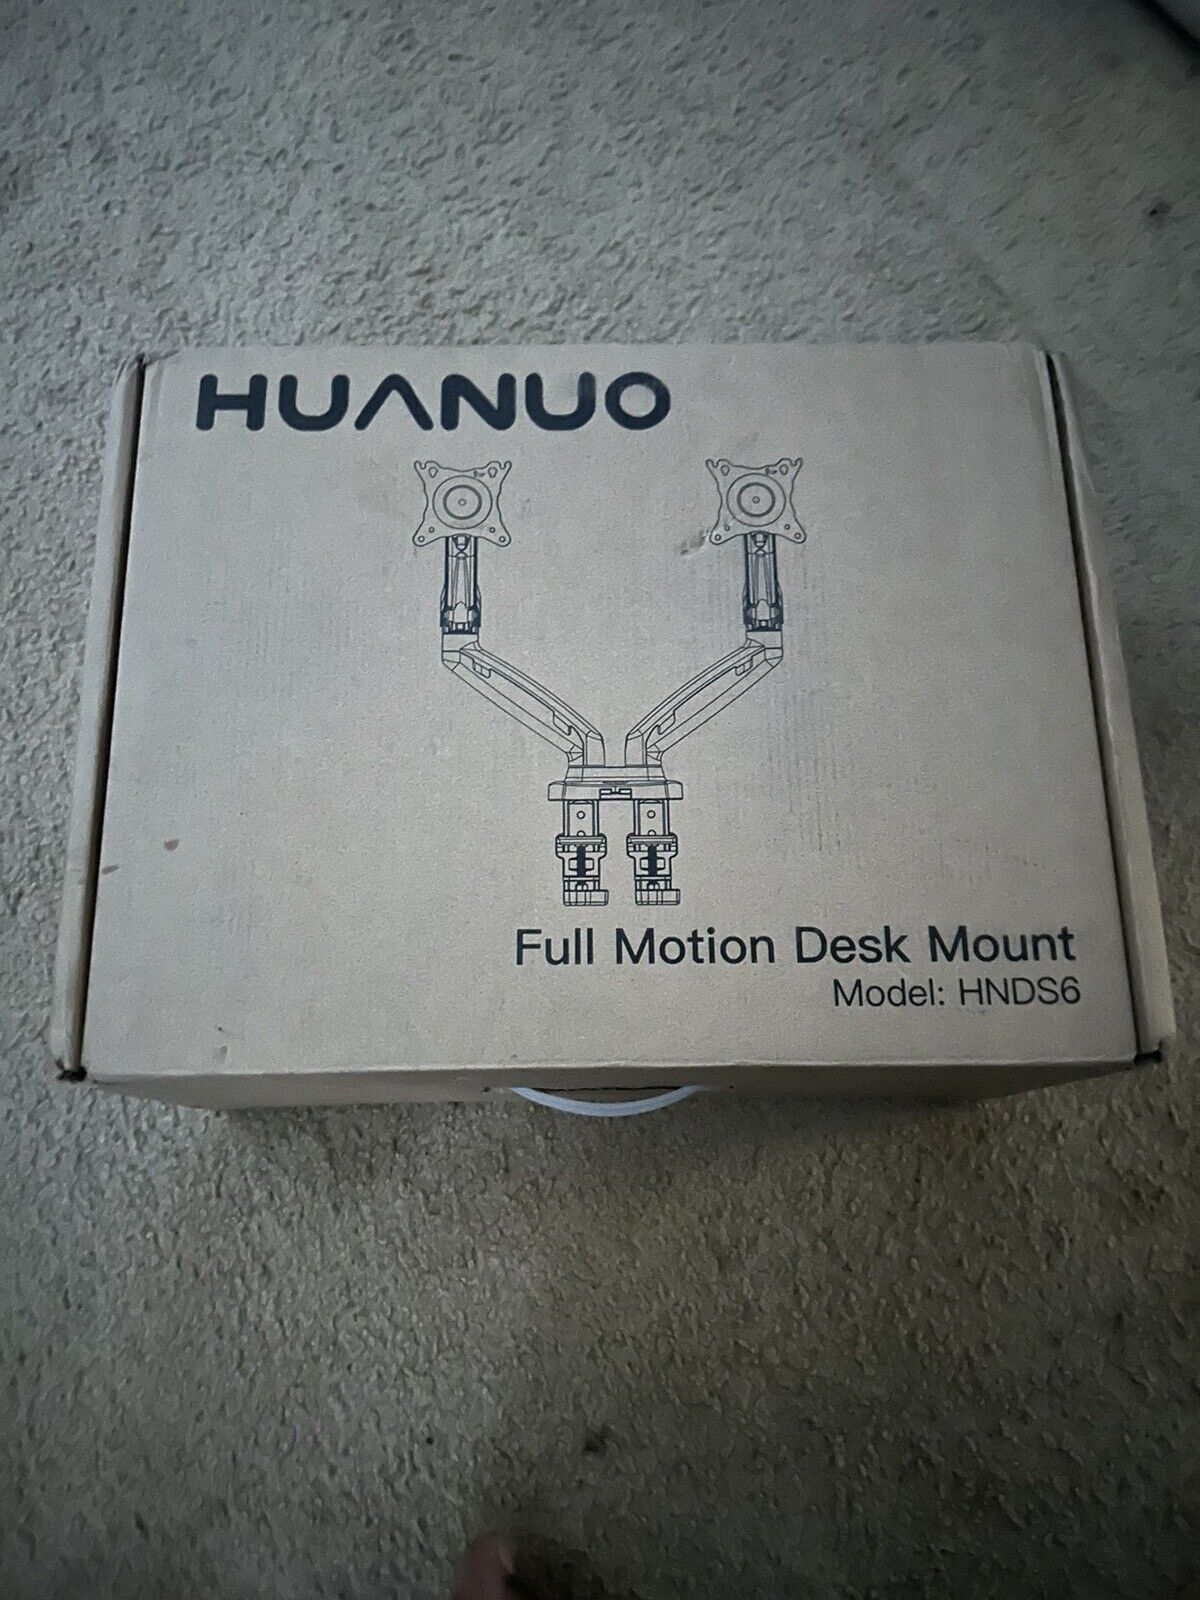 HUANUO HNDS6 Dual Monitor Stand - Black